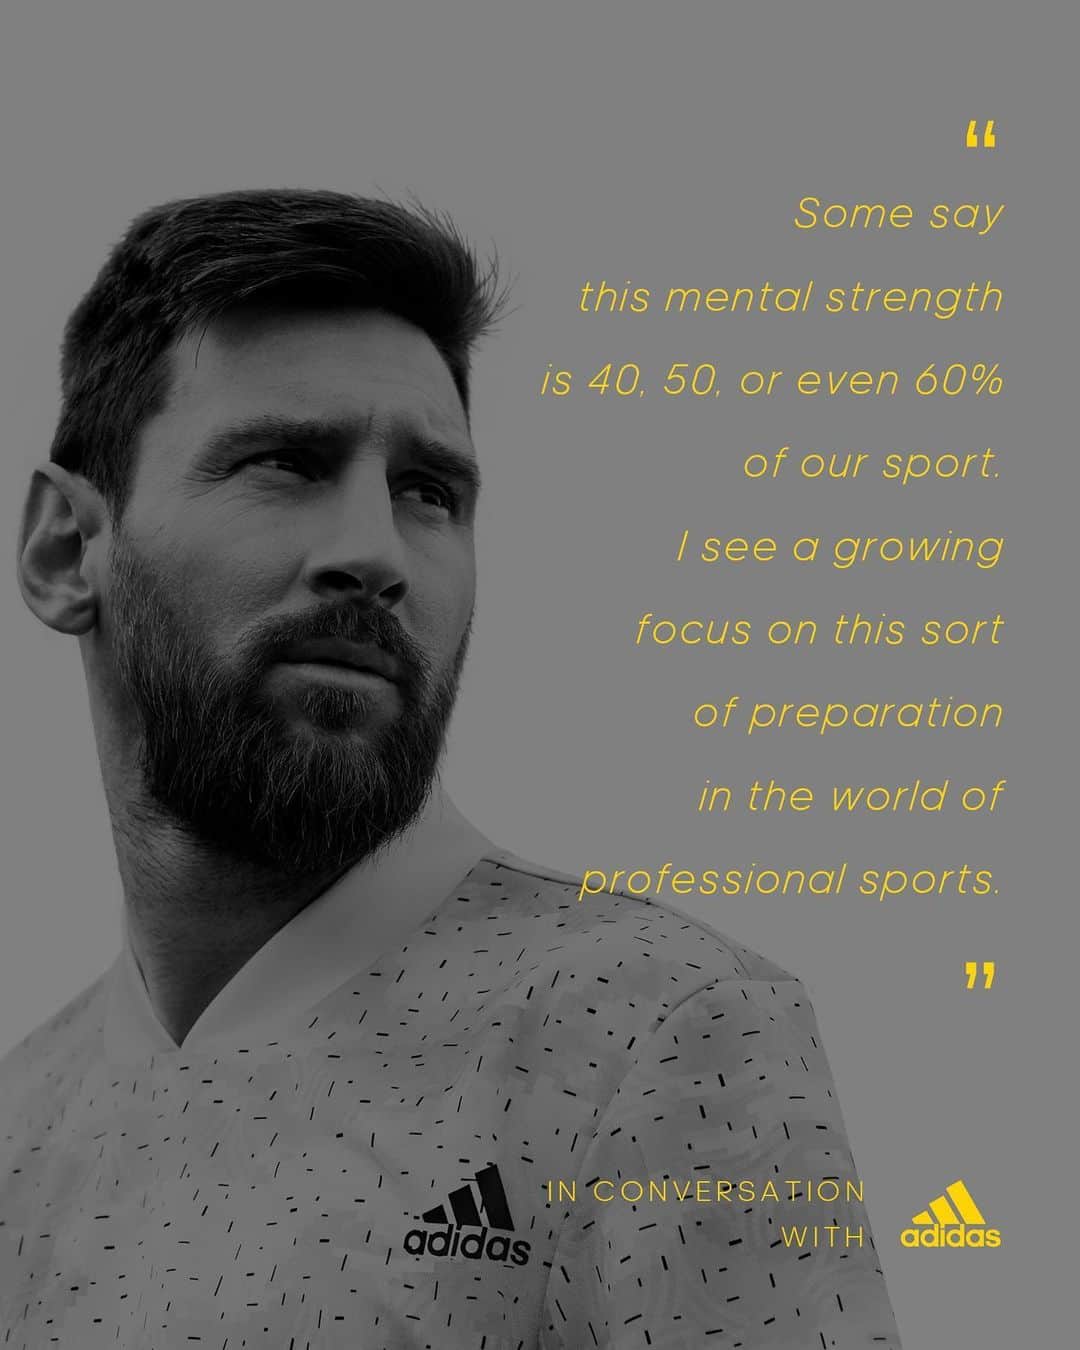 Team Messiのインスタグラム：「“Some say this mental strength is 40, 50, or even 60% of our sport. I see a growing focus on this sort of preparation in the world of professional sports.”⁣ ⁣ @leomessi in conversation with @adidas about mindfulness, mental strength and the future of football.⁣ ⁣ Head to adidas.com to read the full story. ⁣ ⁣ #hometeam ⁣」